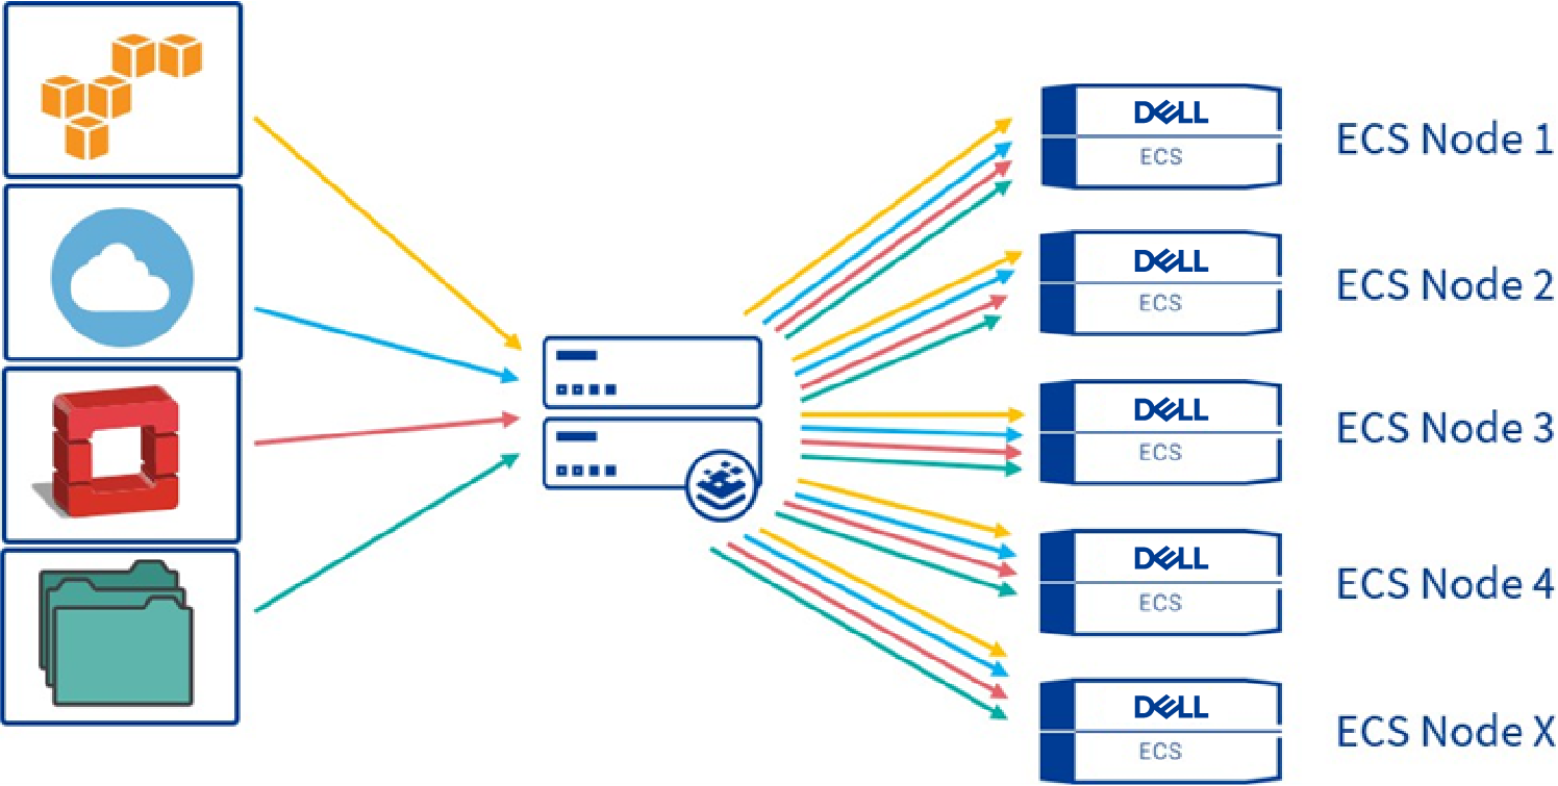 Applications utilize storage through a pair of Kemp load balancers that redirect data traffic across the nodes of a single Dell ECS VDC.